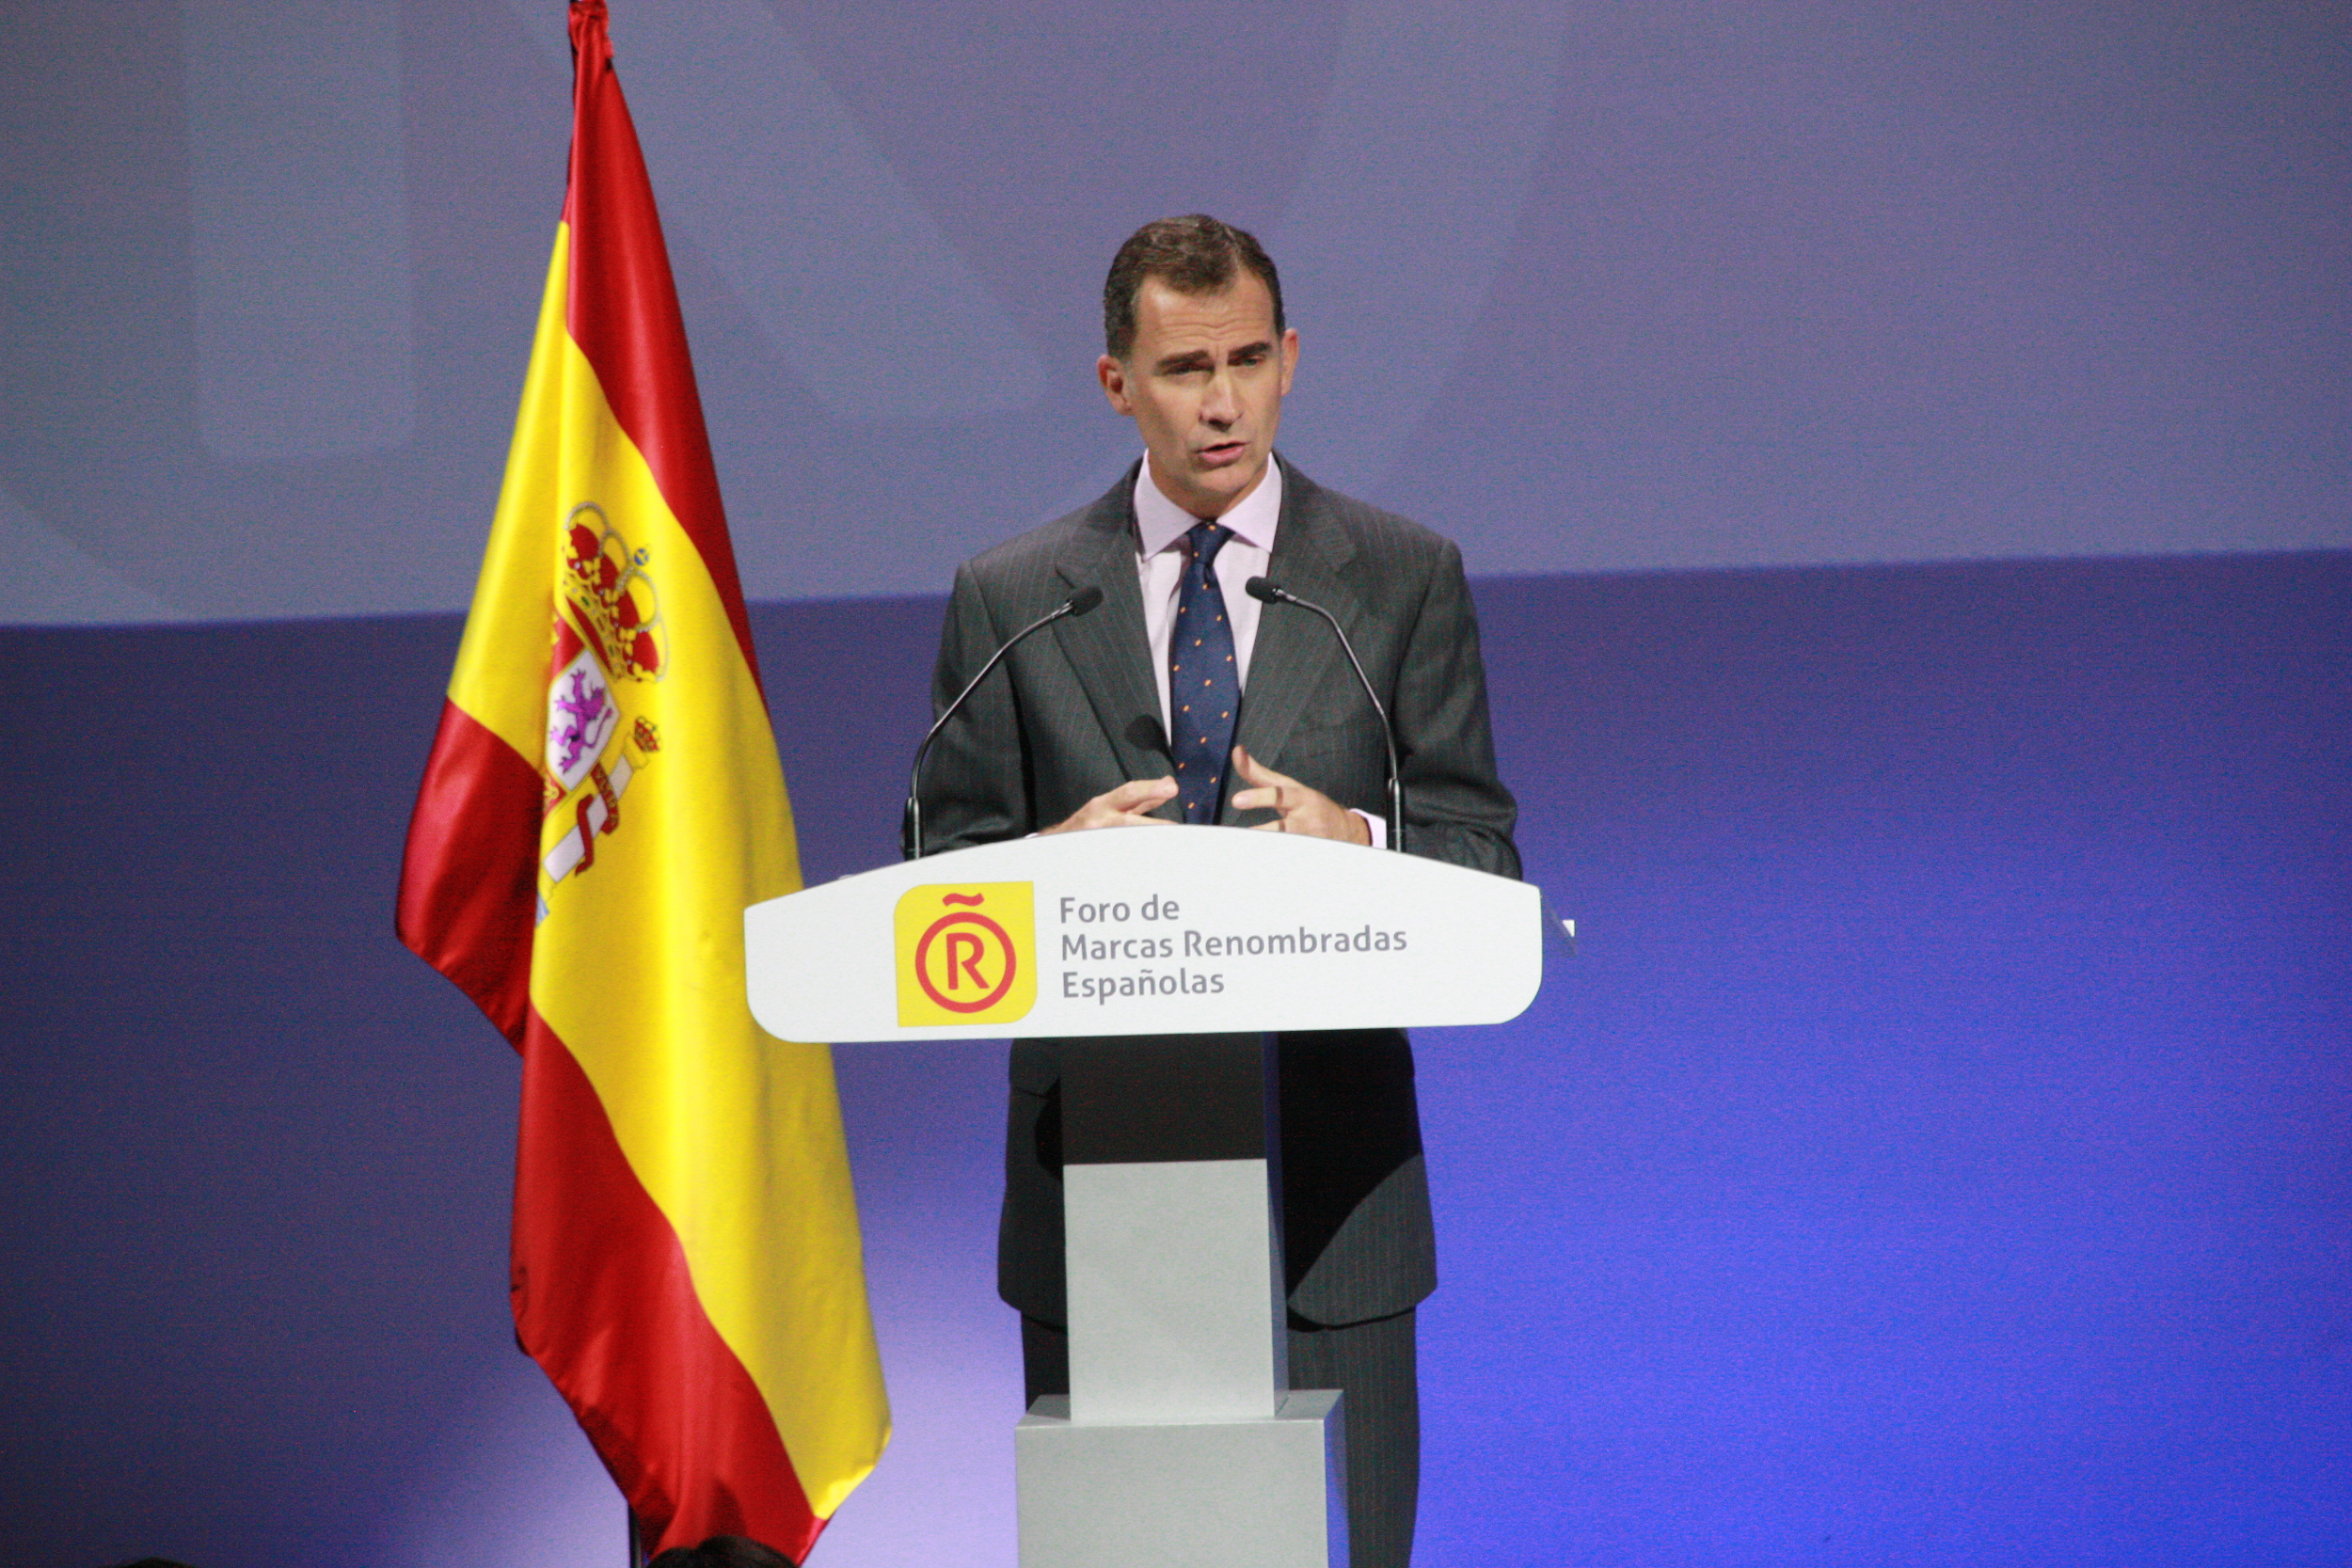 Spain's King, Philip VI at a ceremonial event of 'Marca España' in Madrid (by ACN)